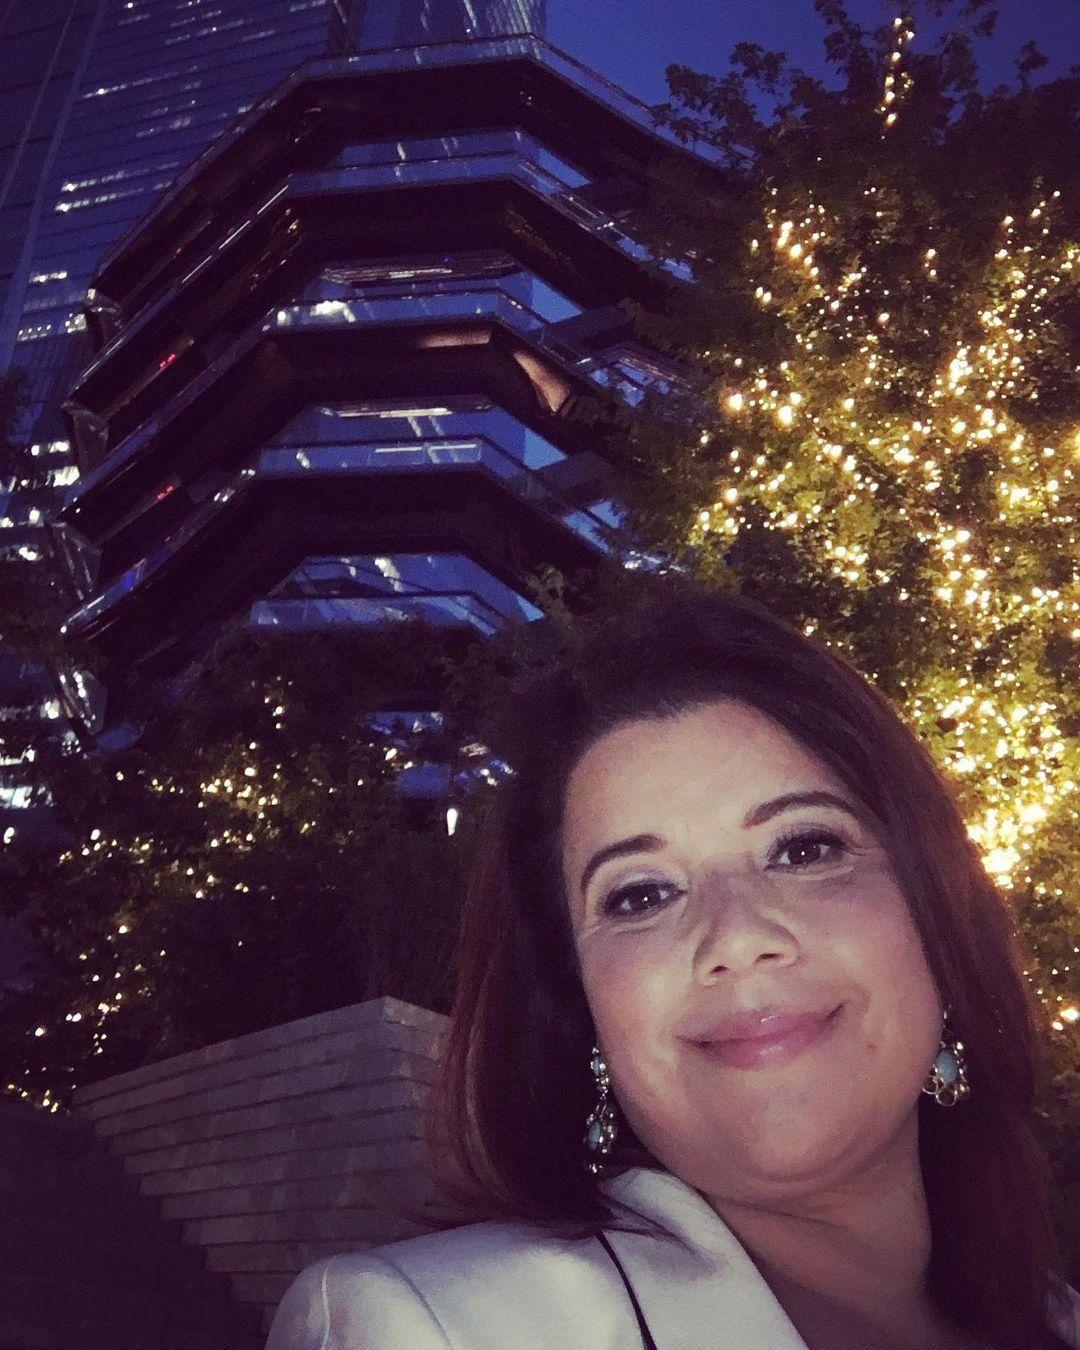 A lovely photo showing Ana Navarro out at night in front of a shiny sky-scraper behind her.